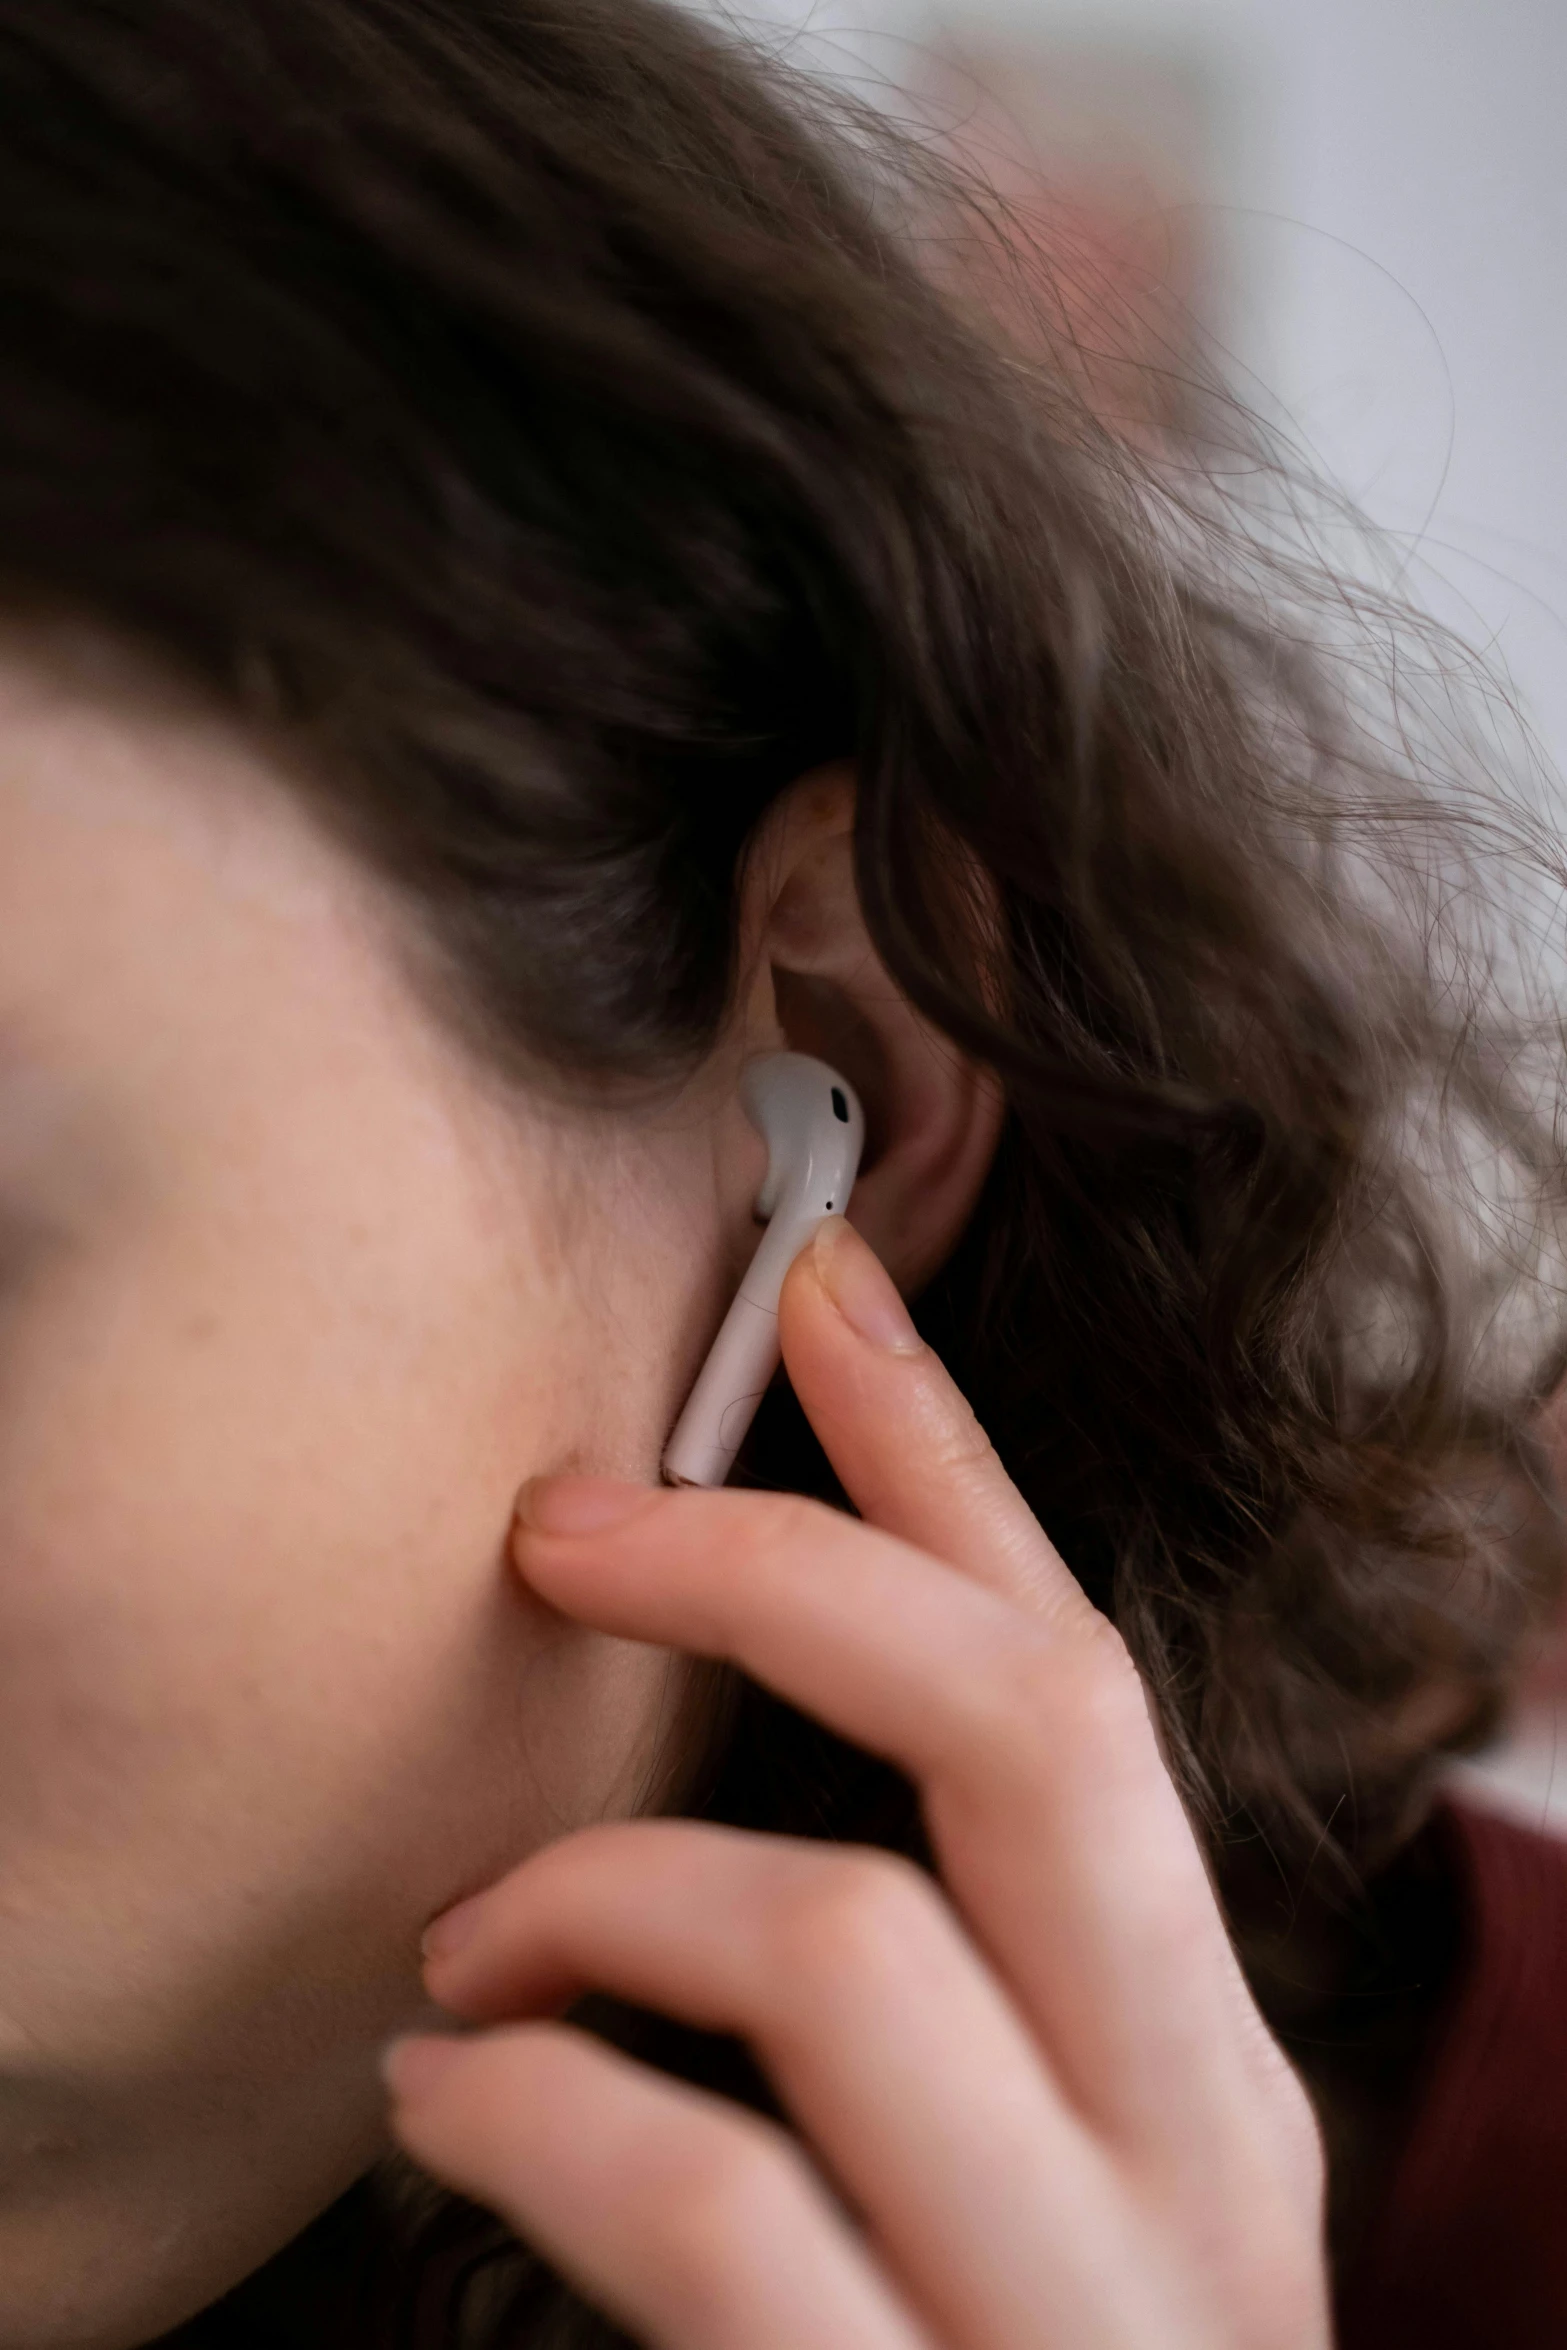 the woman's ear has a cell phone attached to it